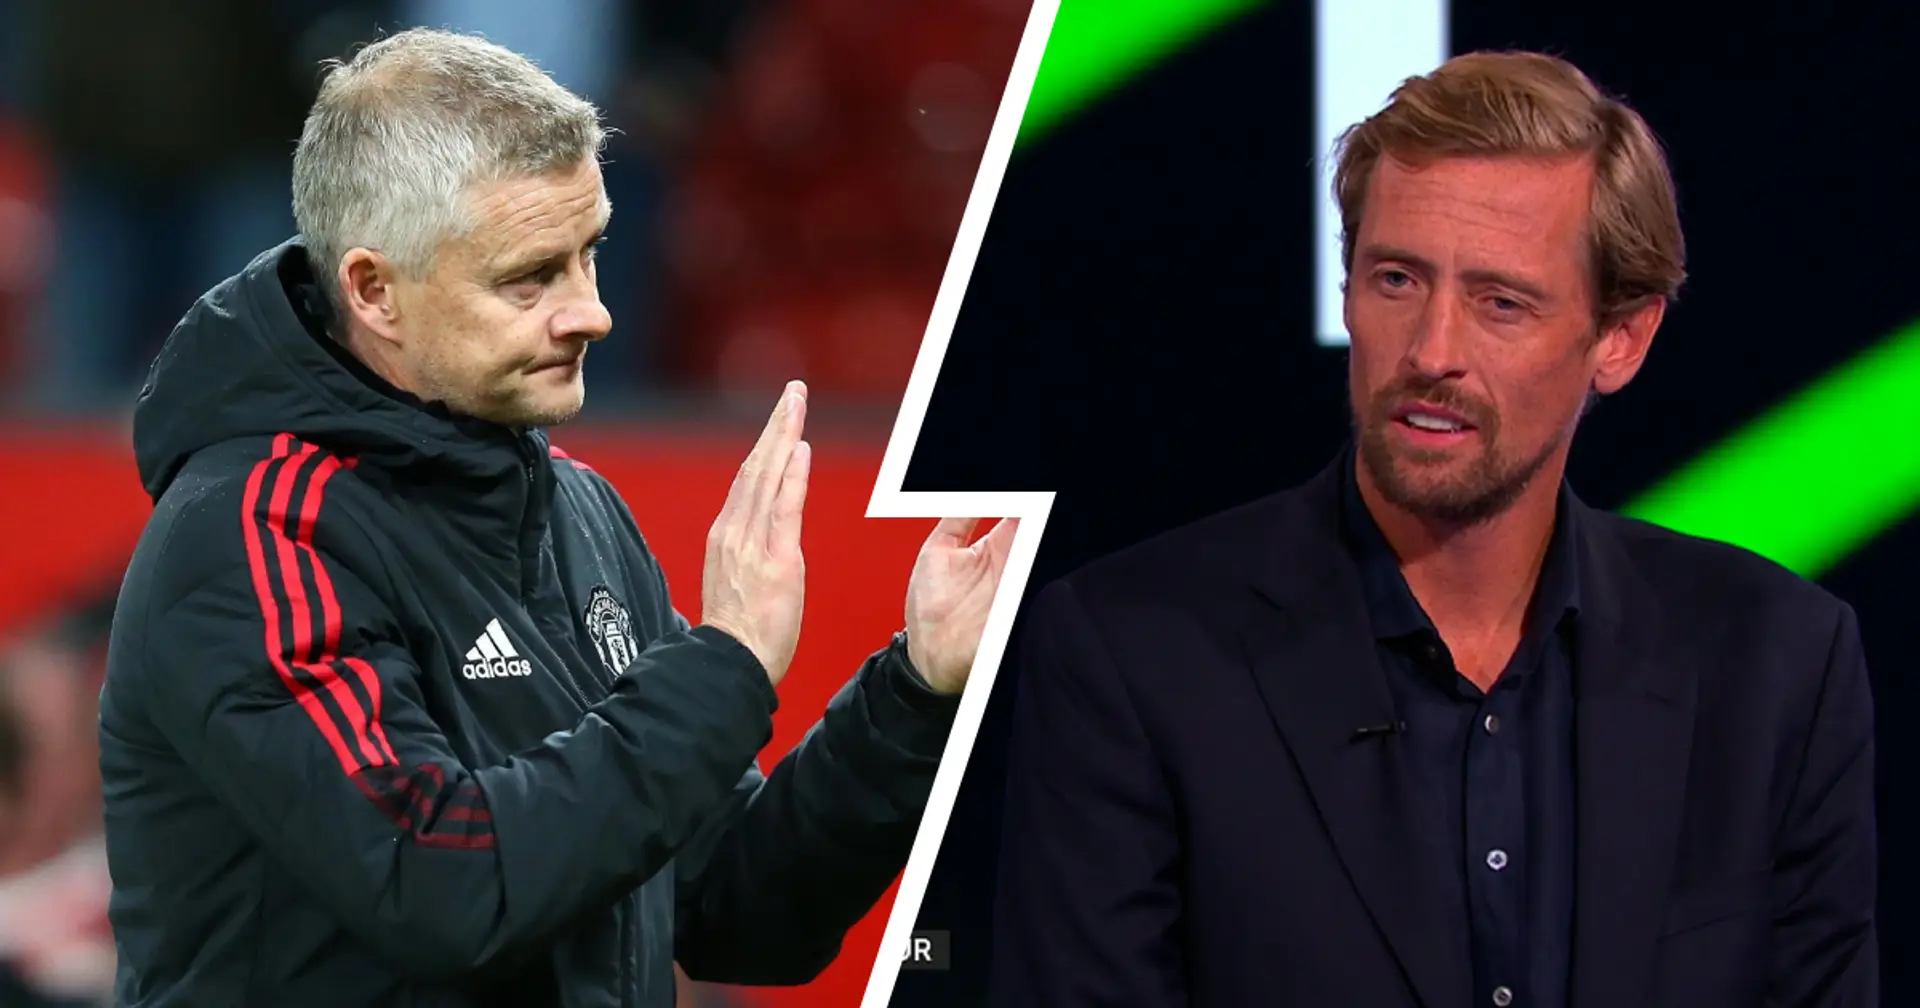 'He's come from Cardiff and Molde': Peter Crouch explains what makes Solskjaer easy target for criticism